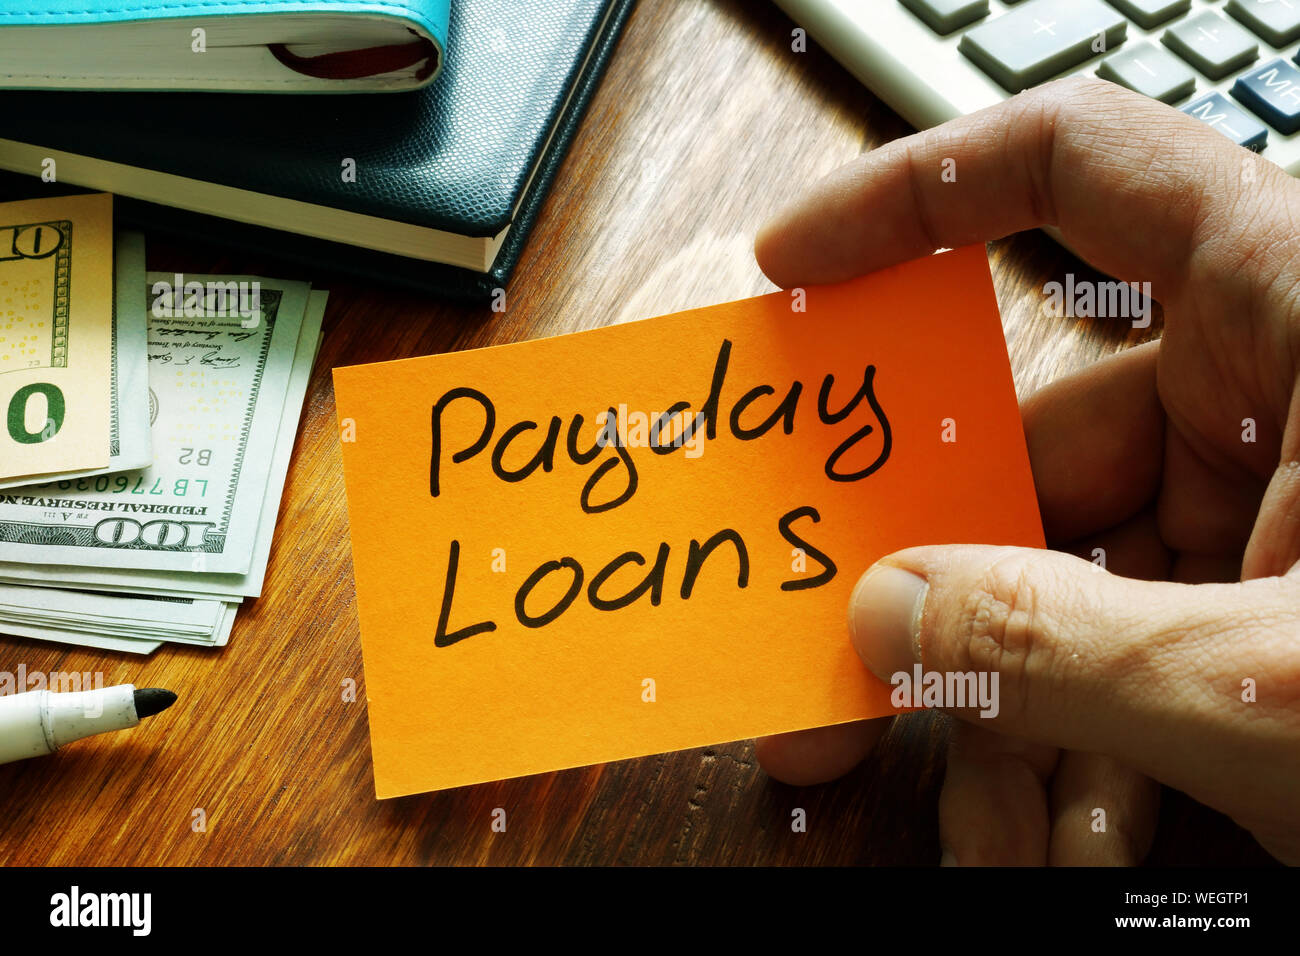 Payday loans written on a piece of paper. Stock Photo